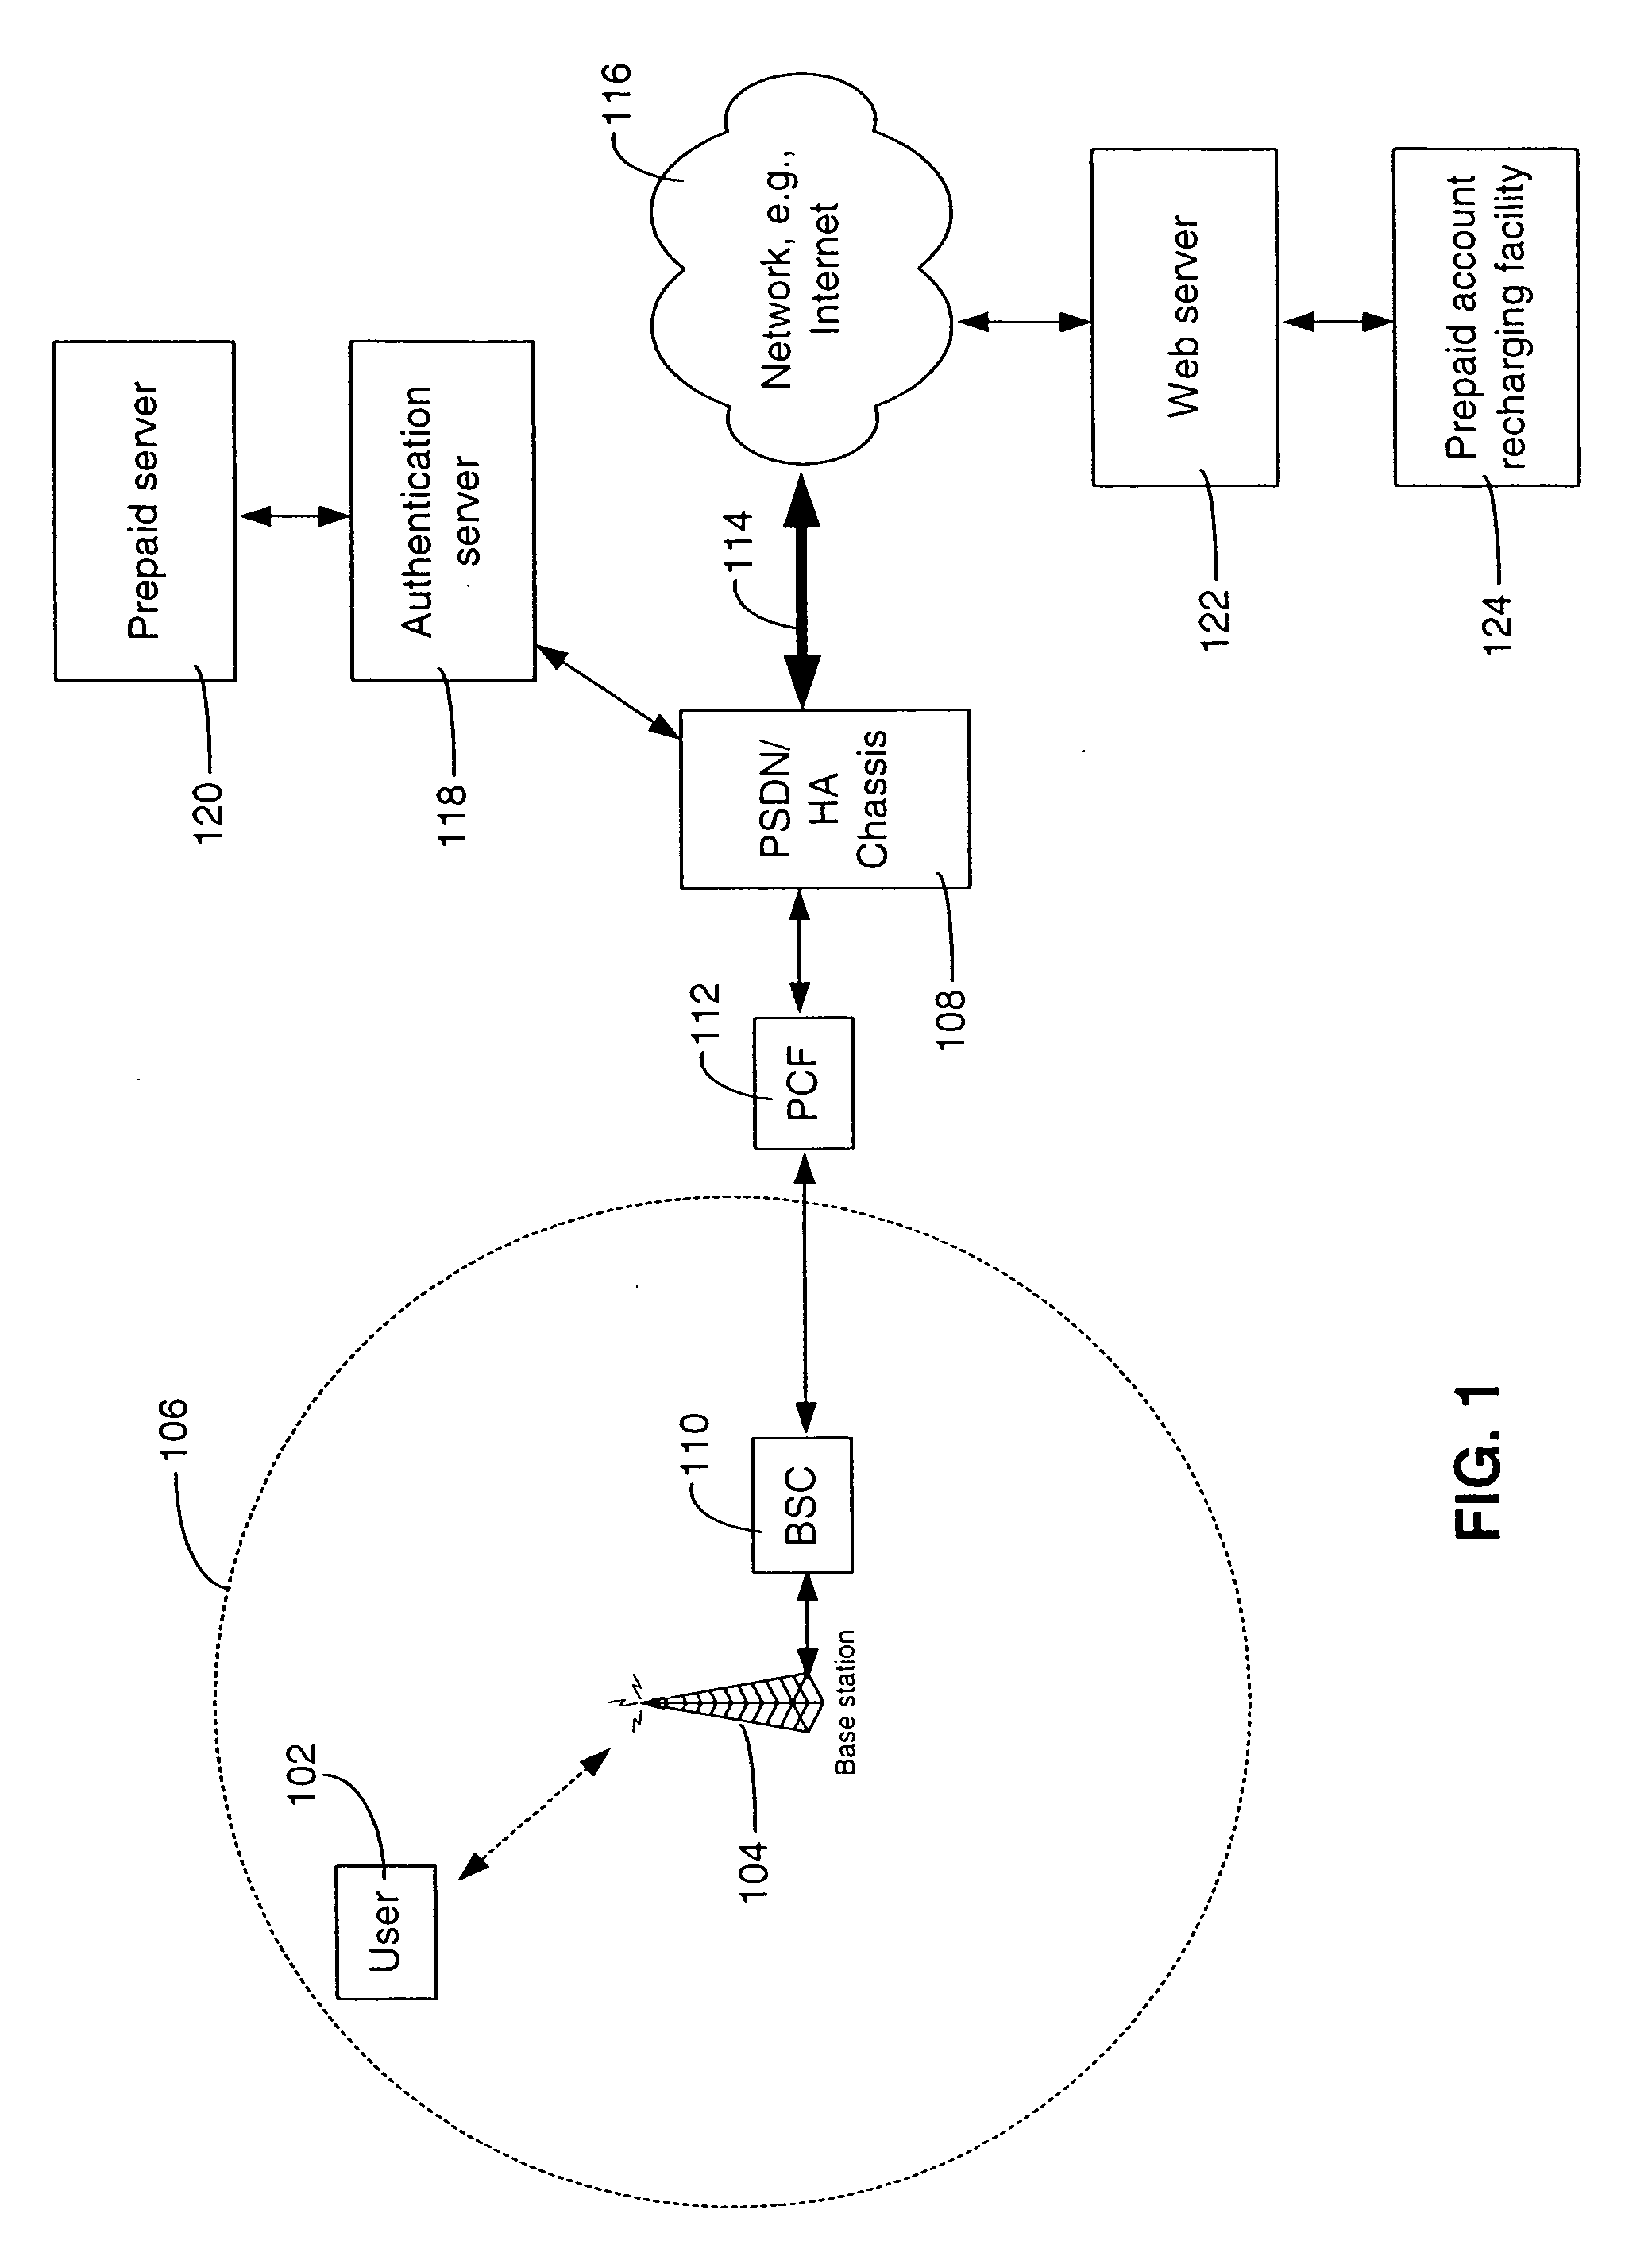 Method and system for traffic redirection for prepaid subscriber sessions in a wireless network